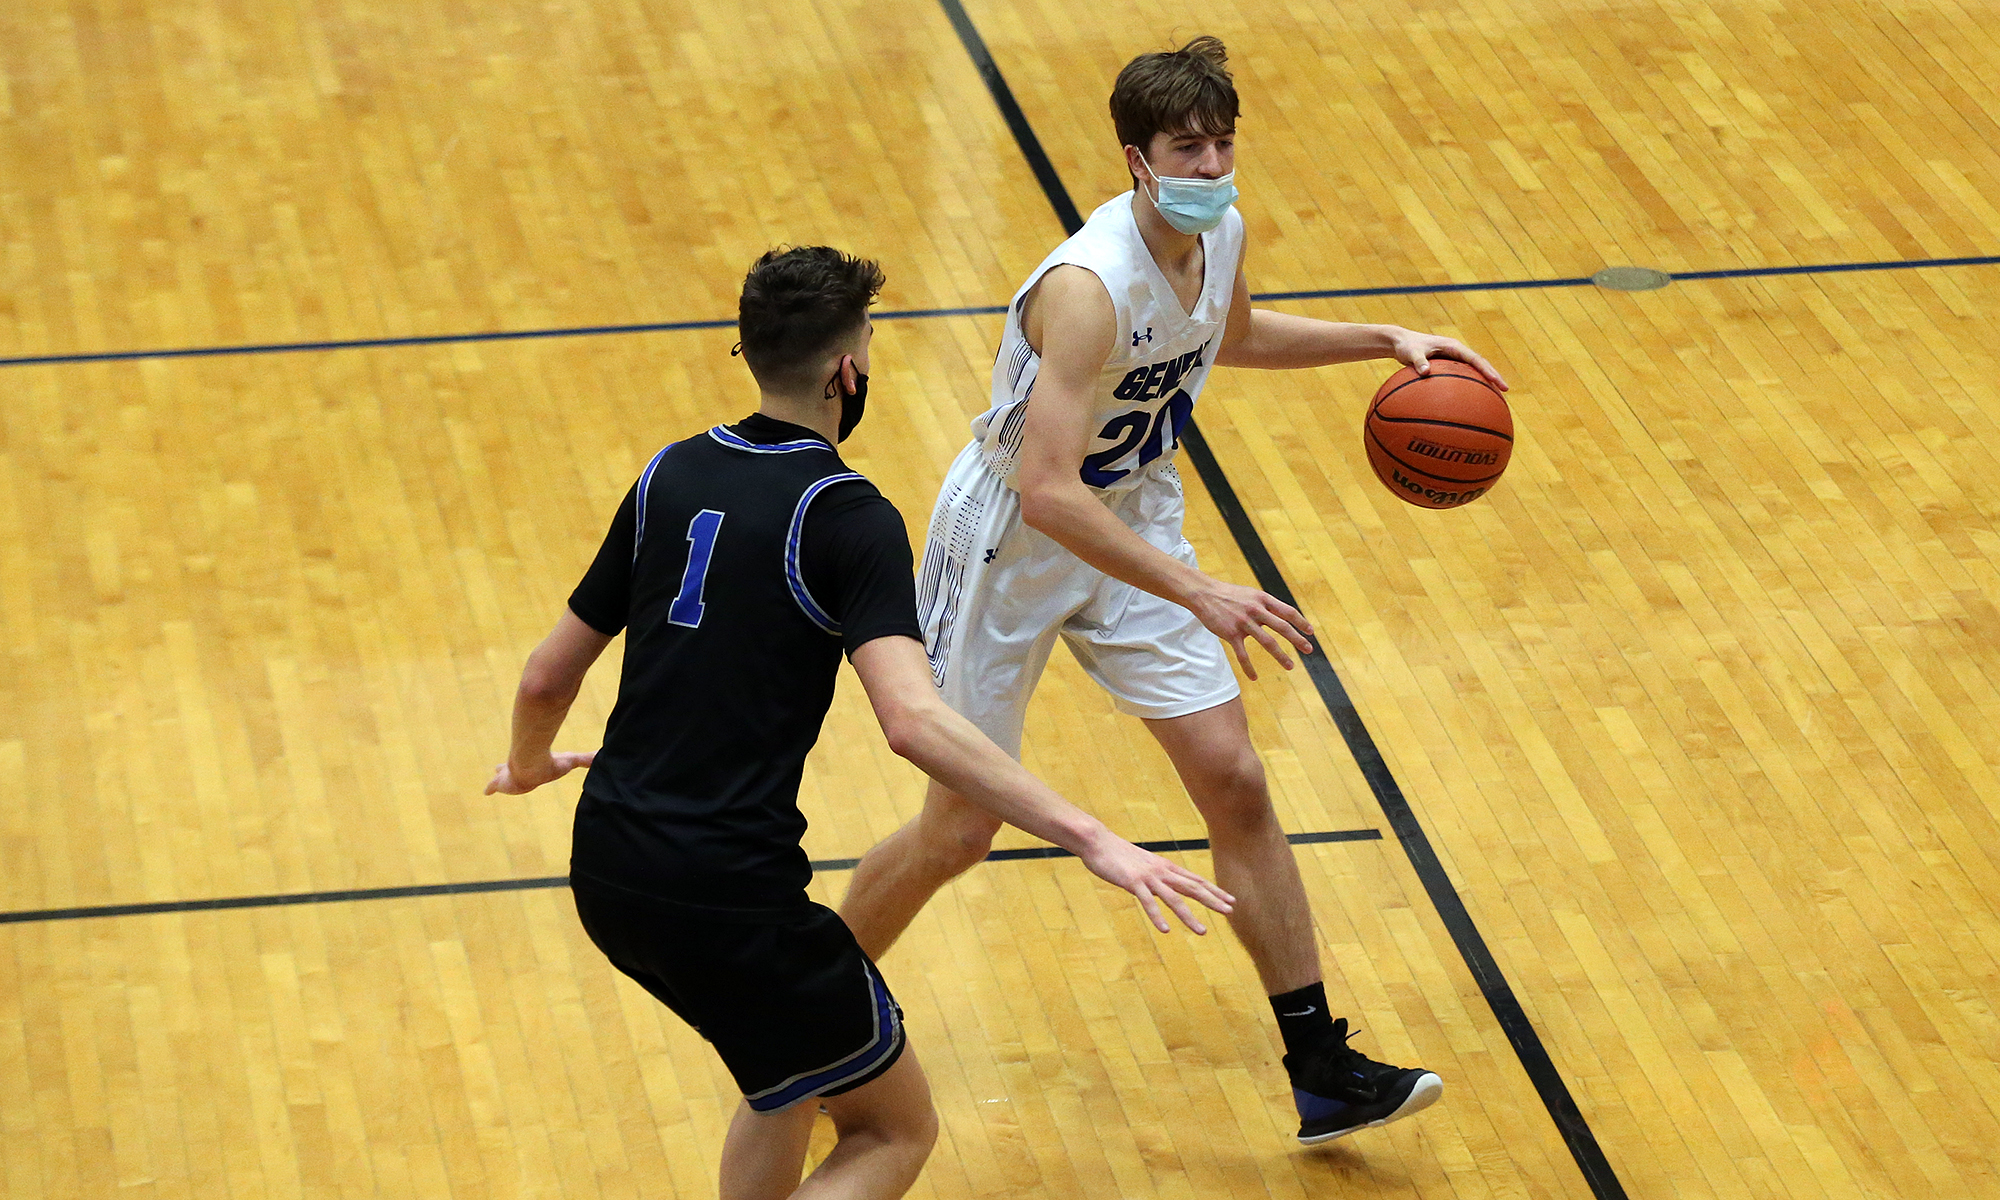 Geneva’s Ryan Huskey (20) controls the ball as St. Charles North’s Ethan Marlowe defends.